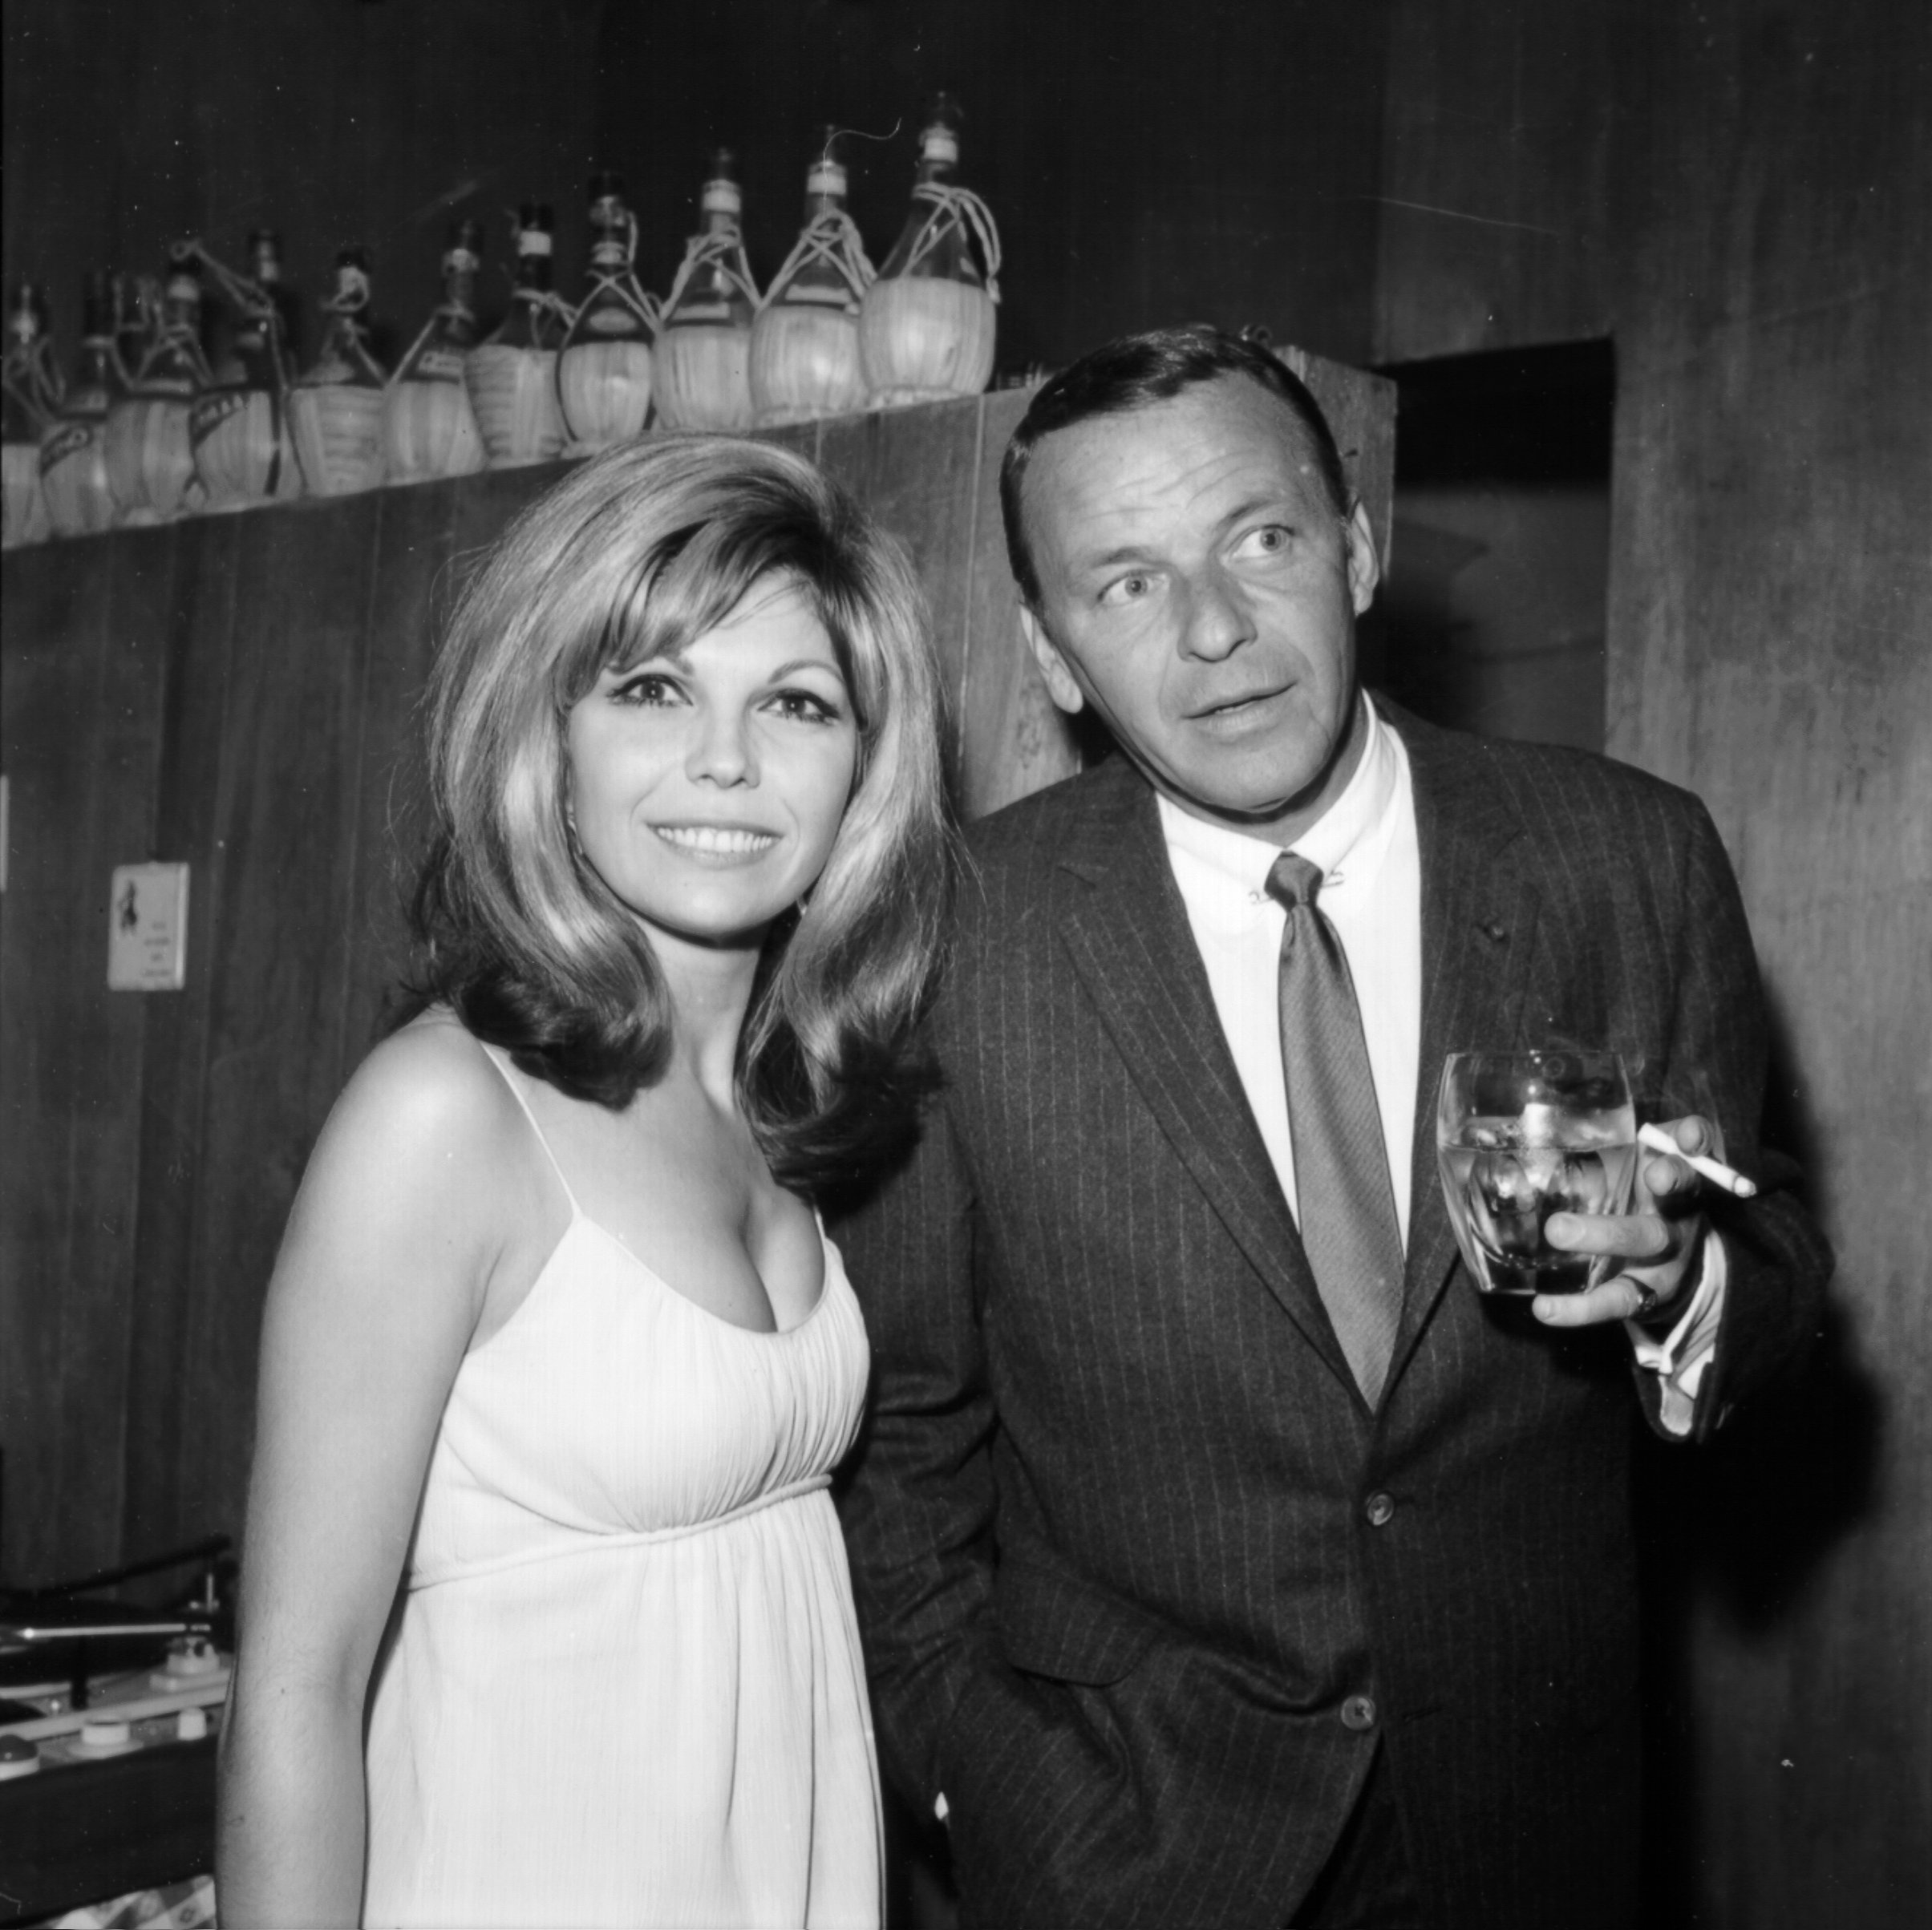 Pop singer Frank Sinatra enjoys a cocktail at an event with his daughter singer Nancy Sinatra in circa 1967 | Photo: Getty Images